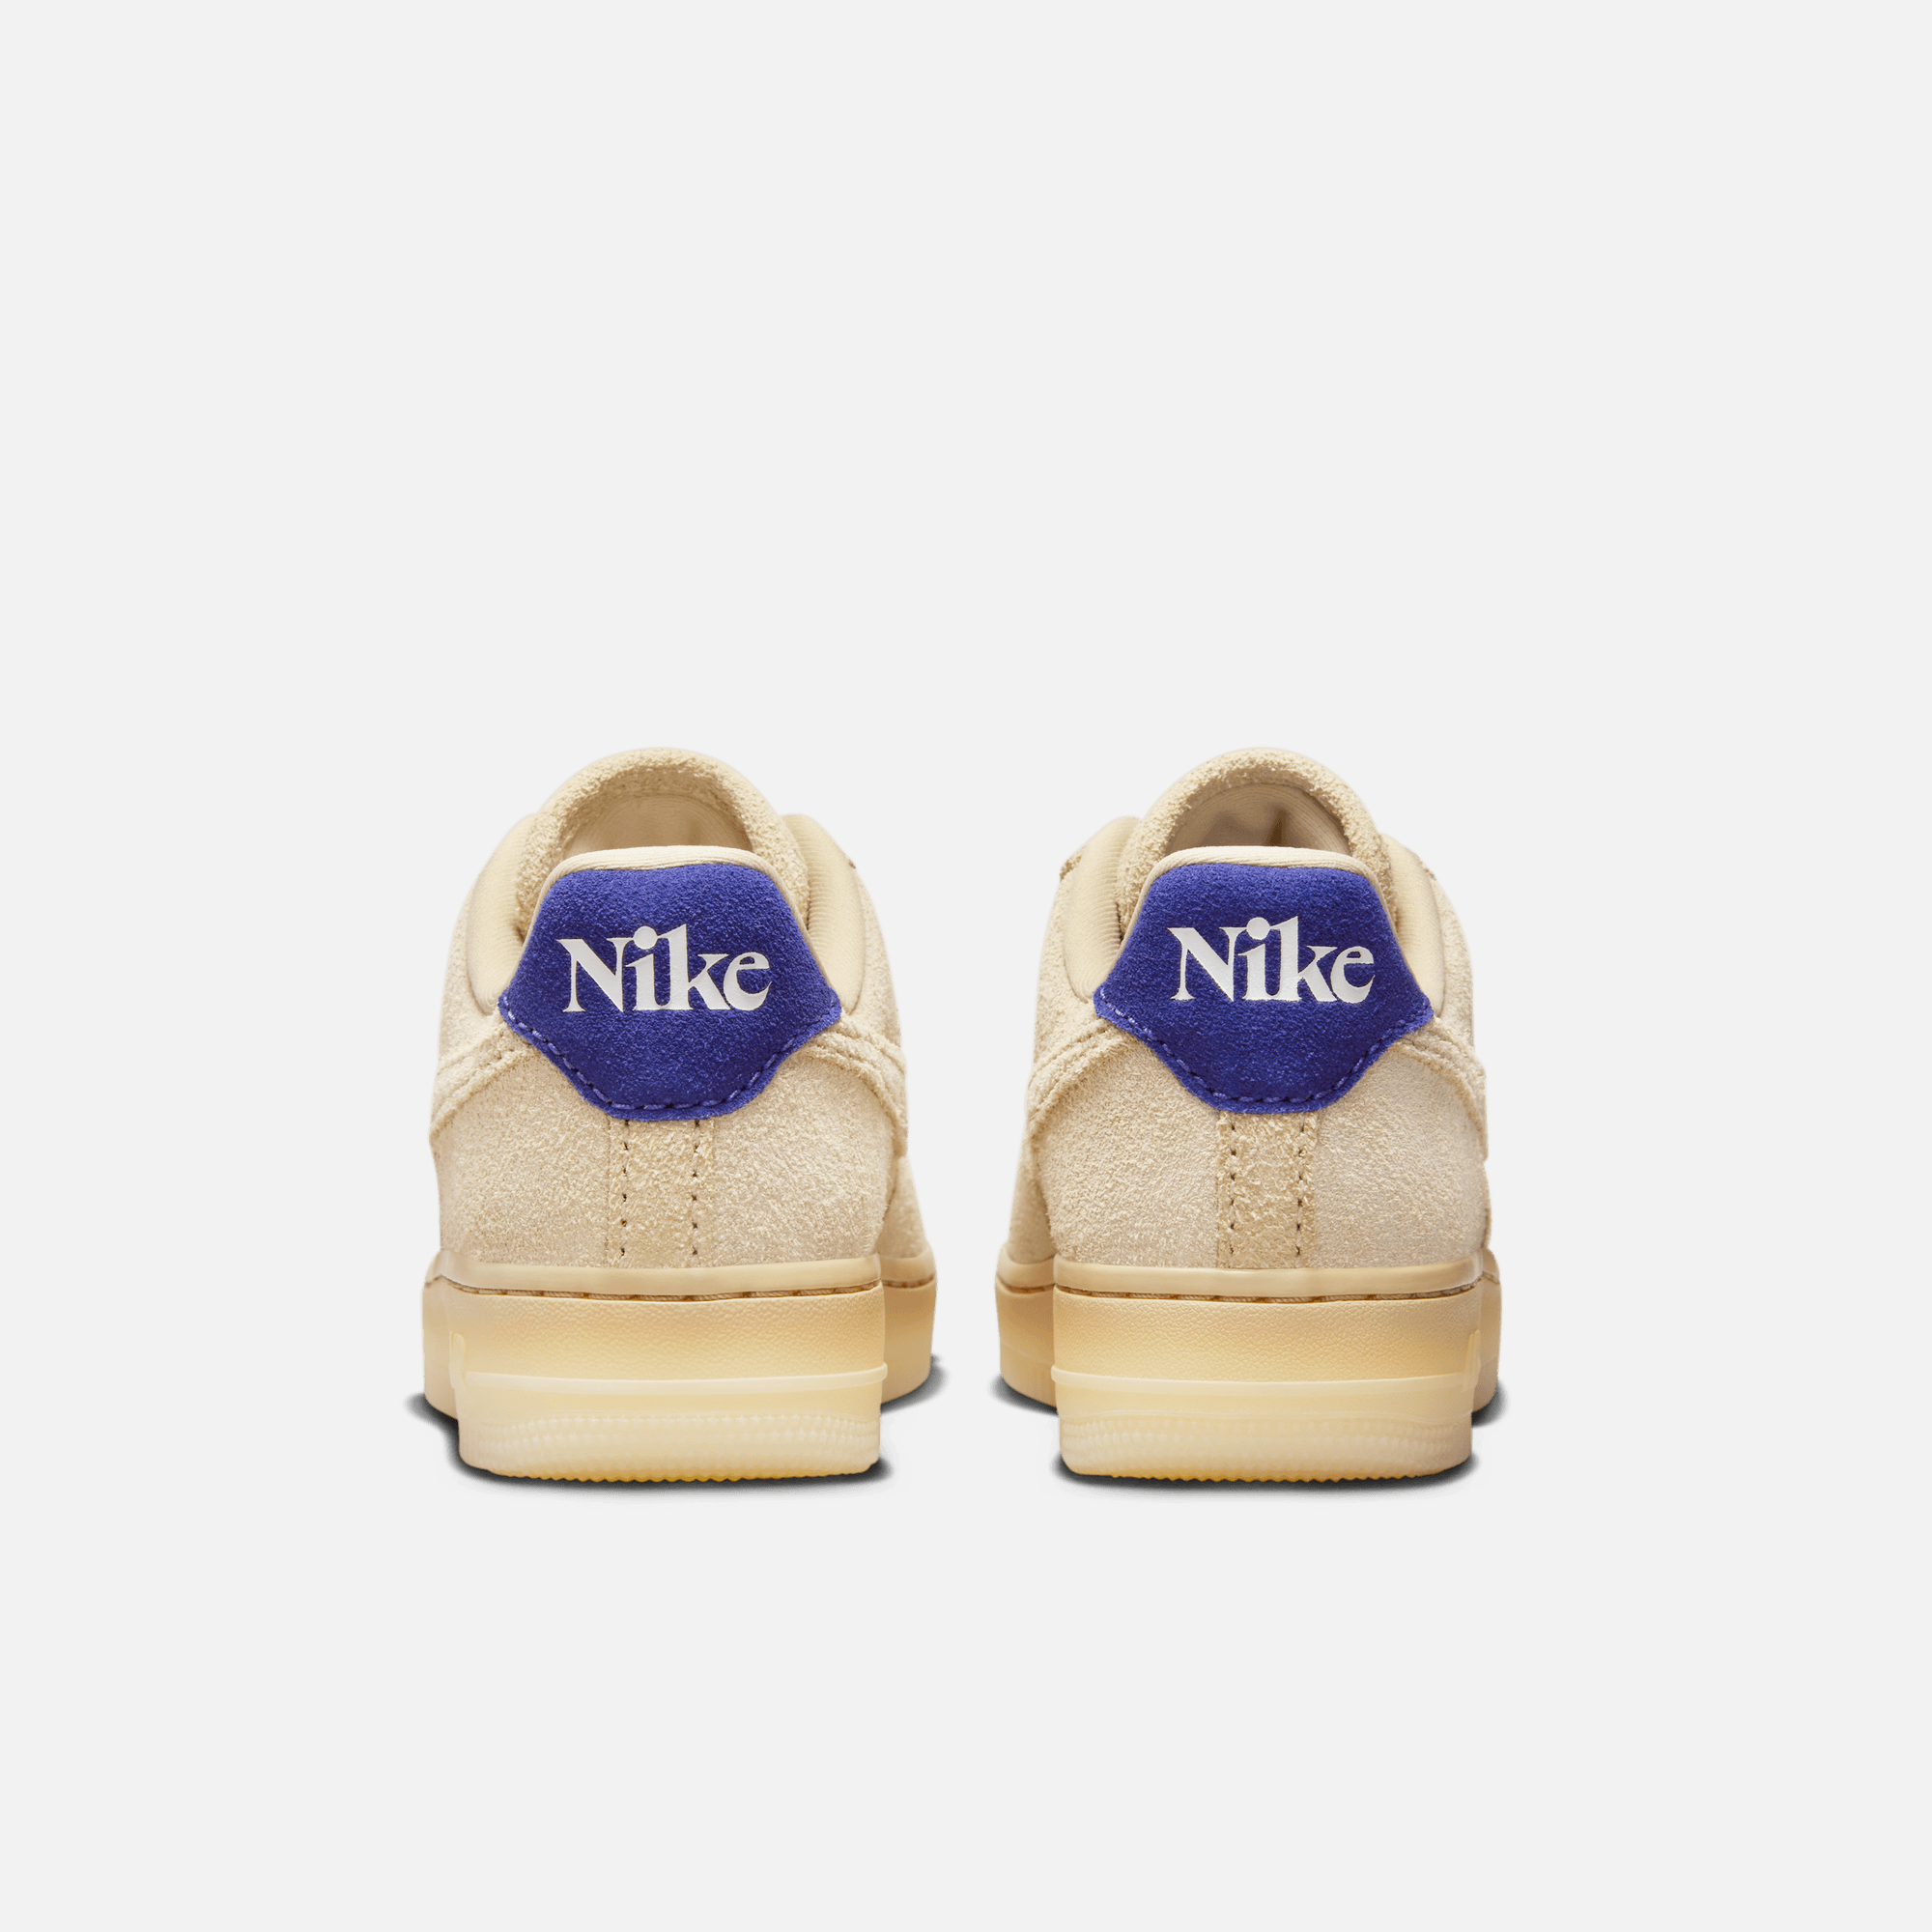 Wmns Air Force 1 Low 'Blue Gold Swoosh